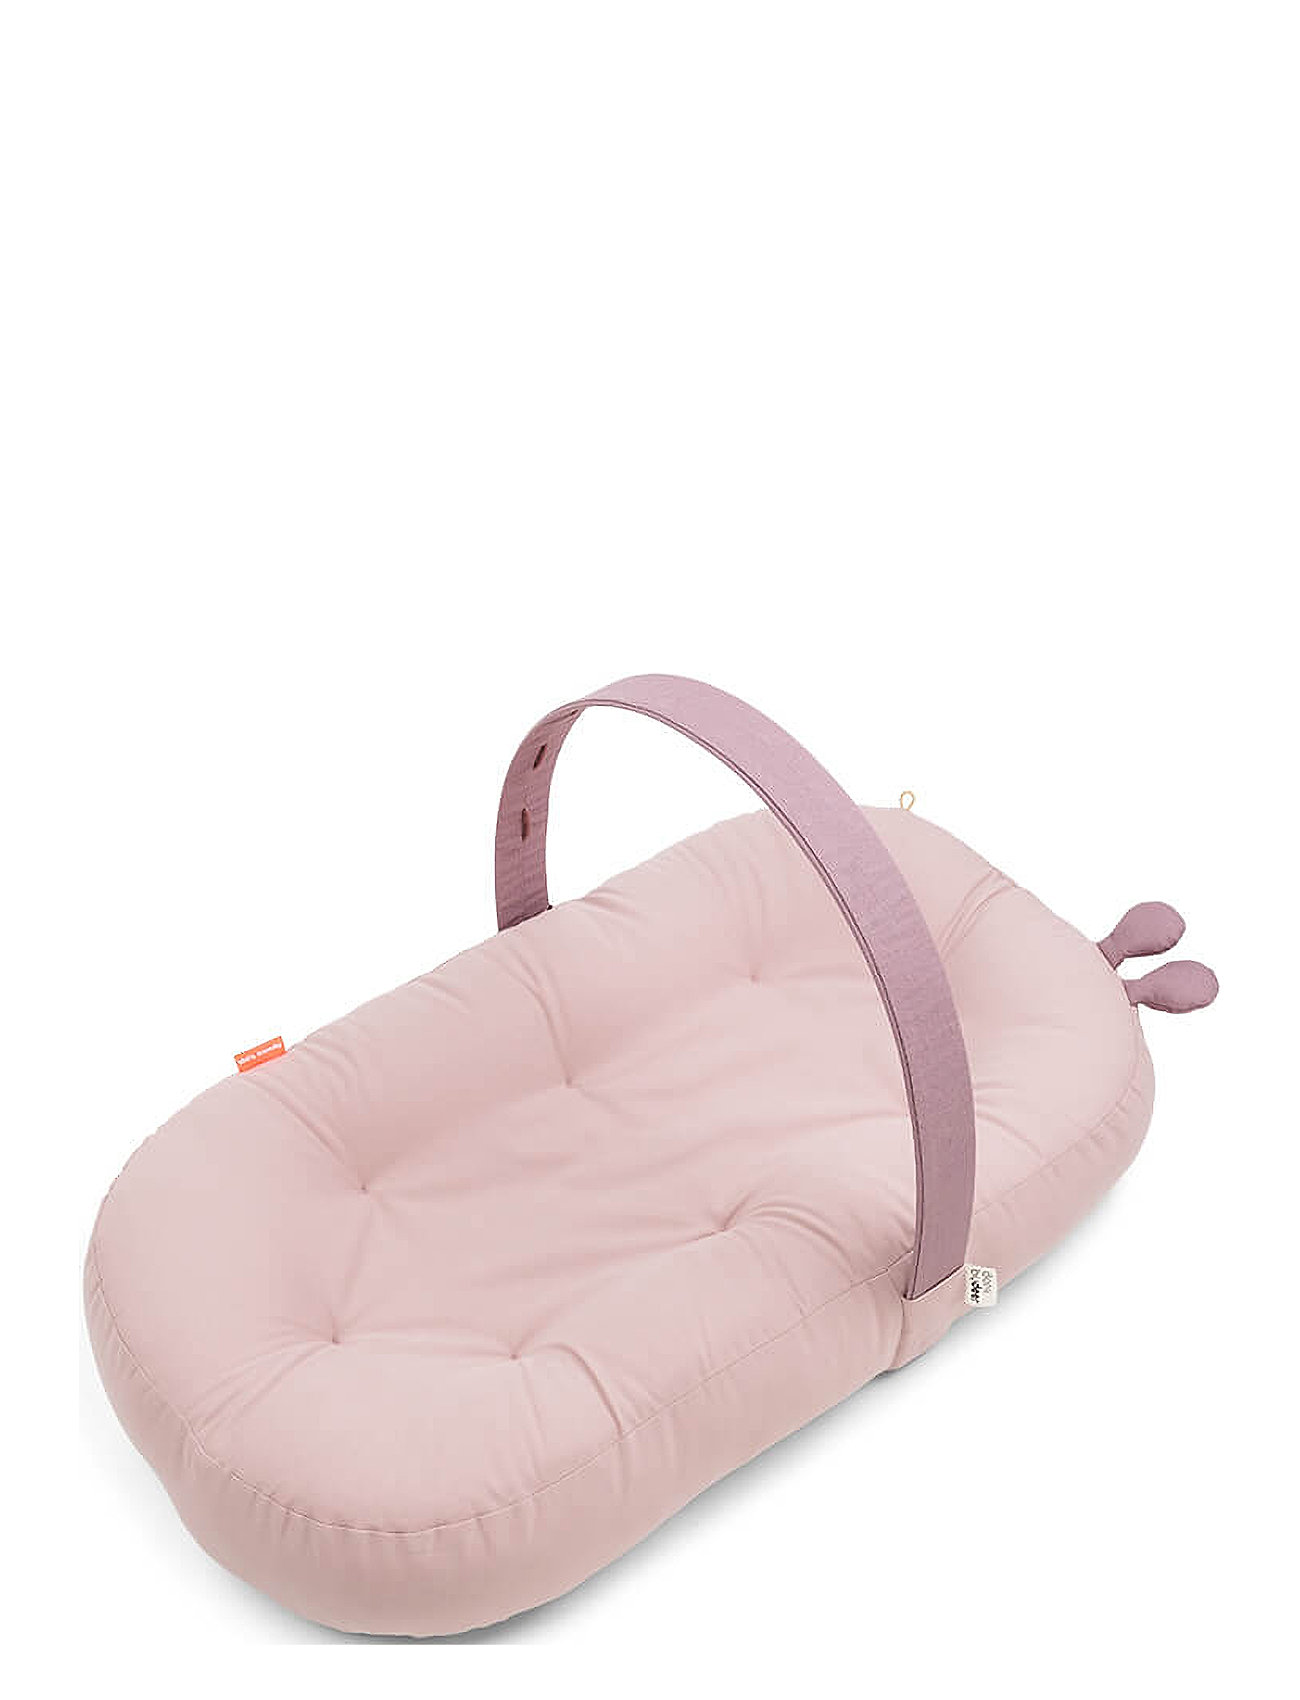 Cozy Lounger W. Activity Arch Raffi Baby & Maternity Baby Sleep Babynests Pink D By Deer